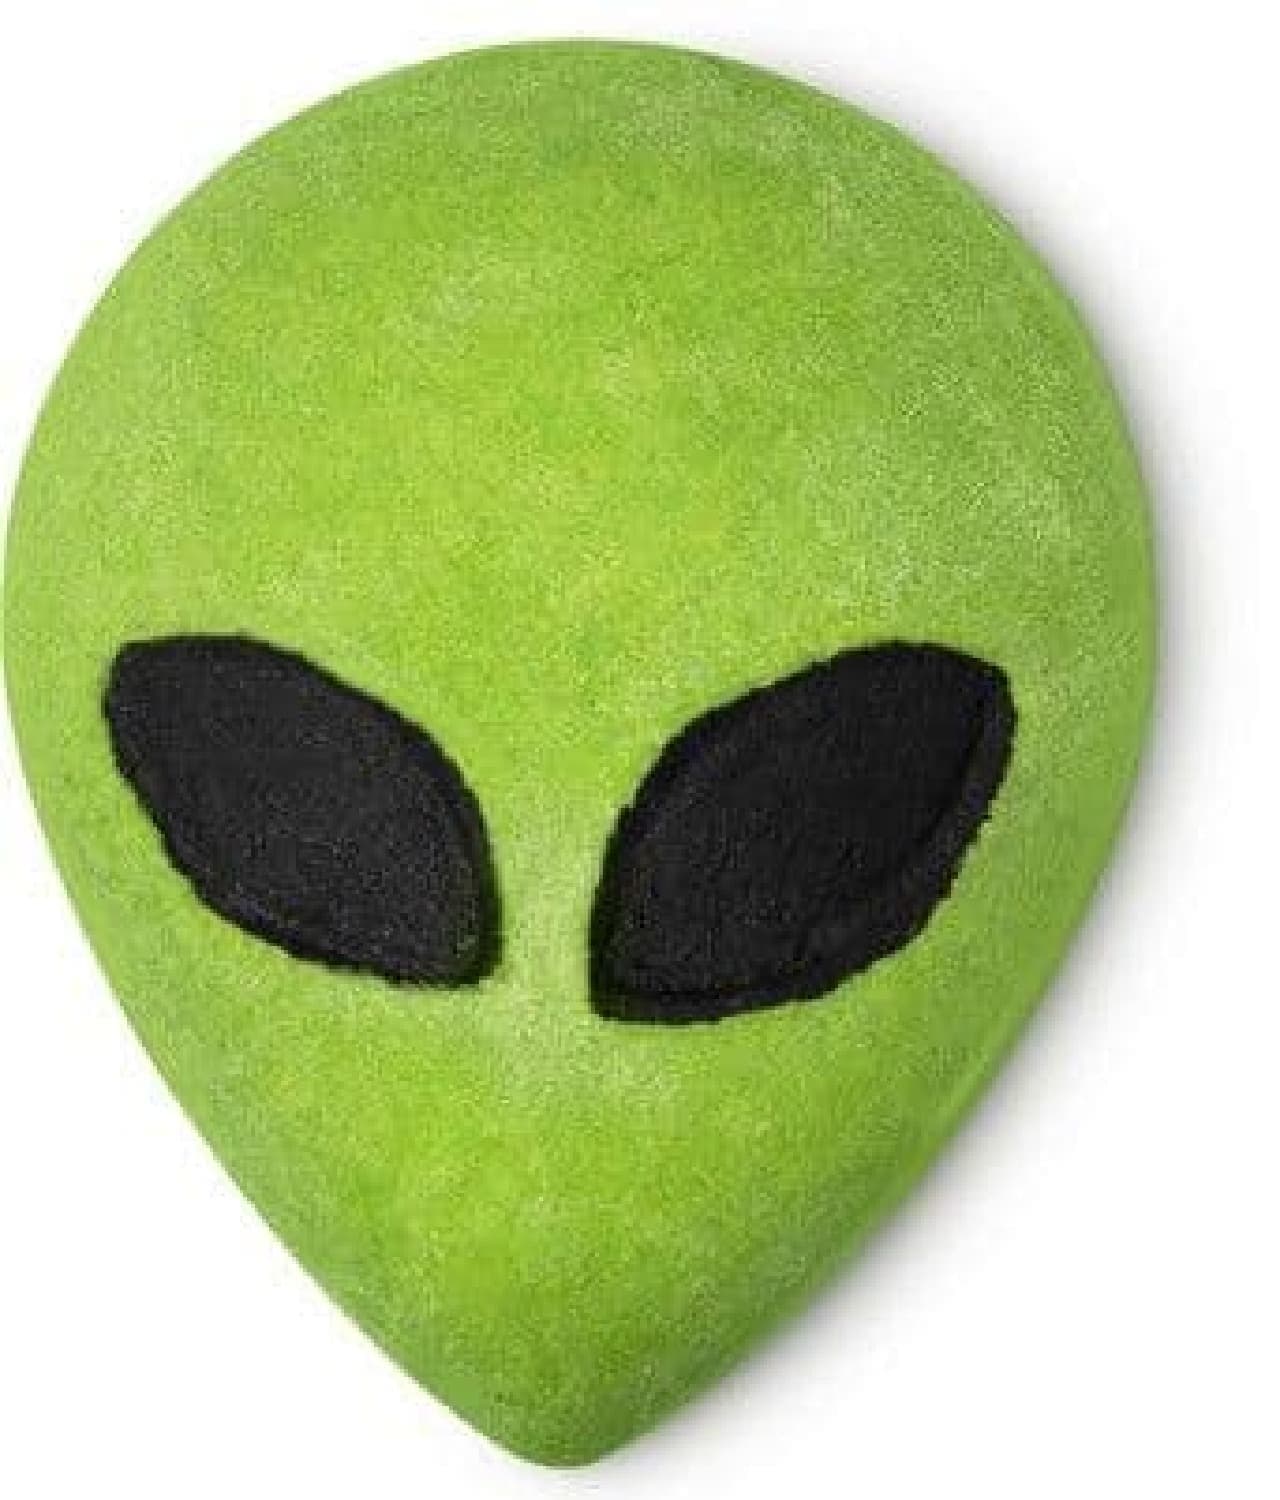 Rush Halloween limited product "Extra Terrestrial"